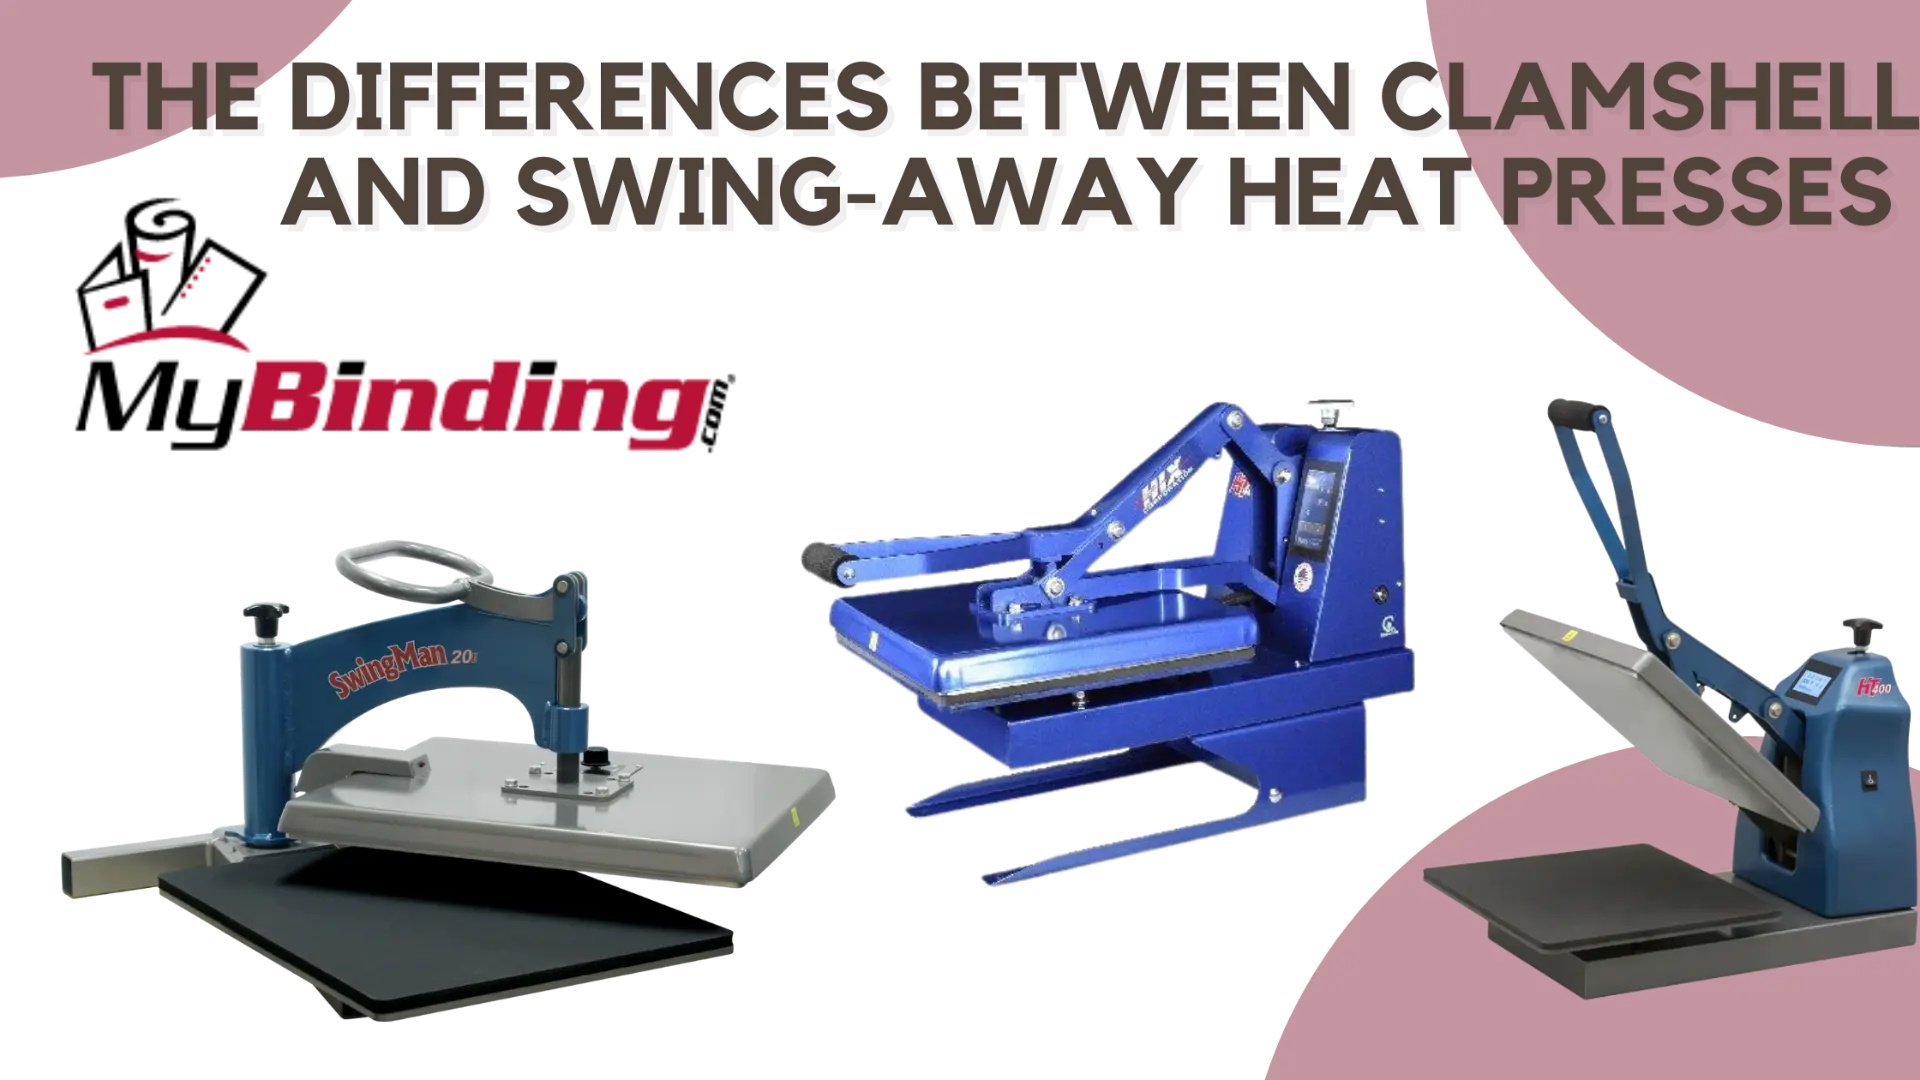 3 images of heat presses in both clamshell and swing away configuration.